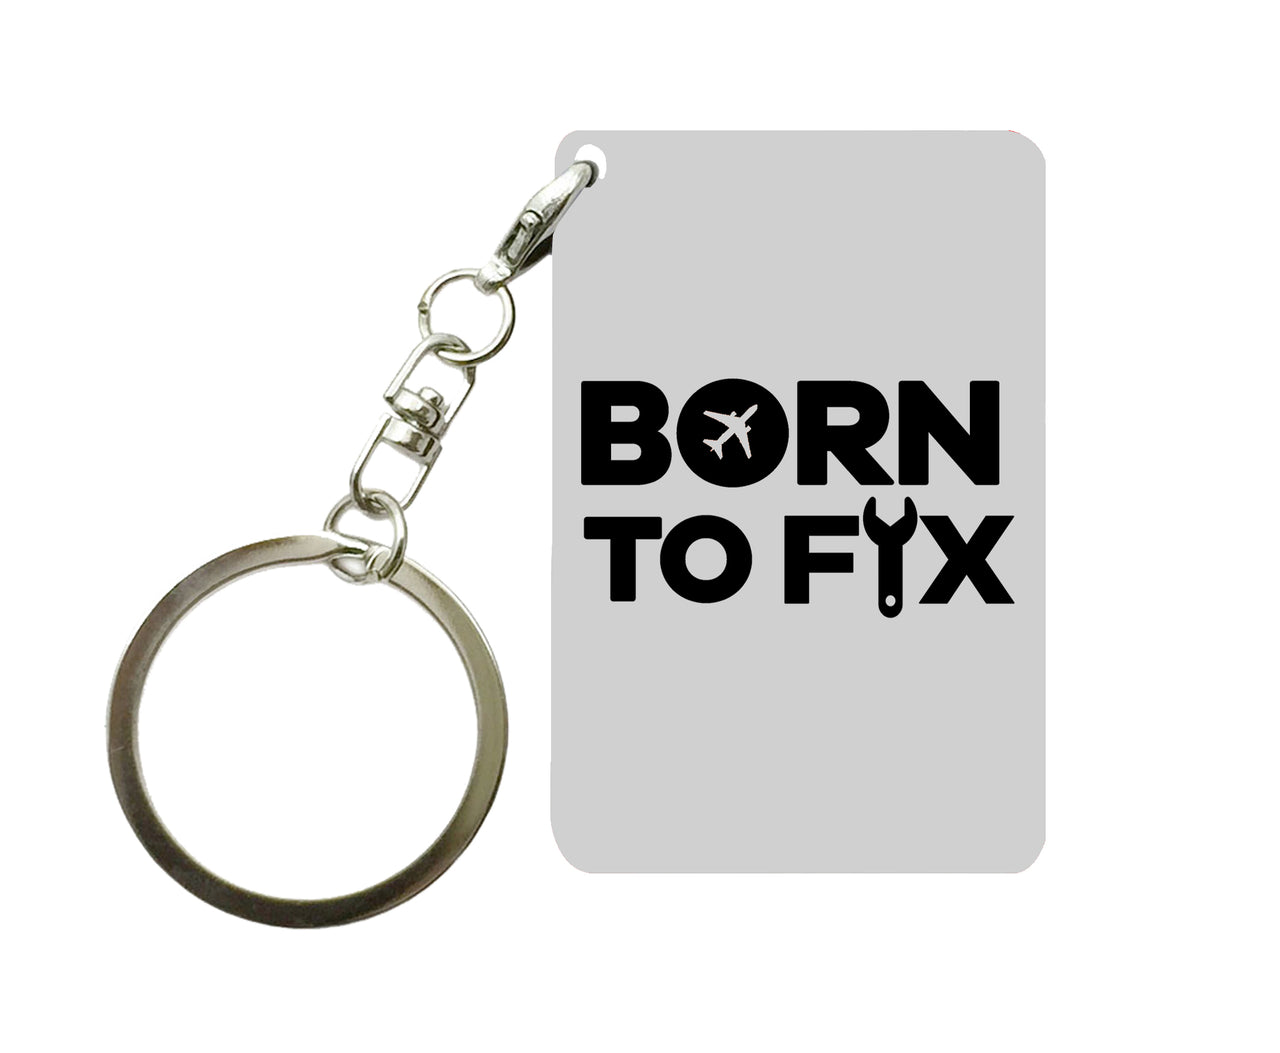 Born To Fix Airplanes Designed Key Chains